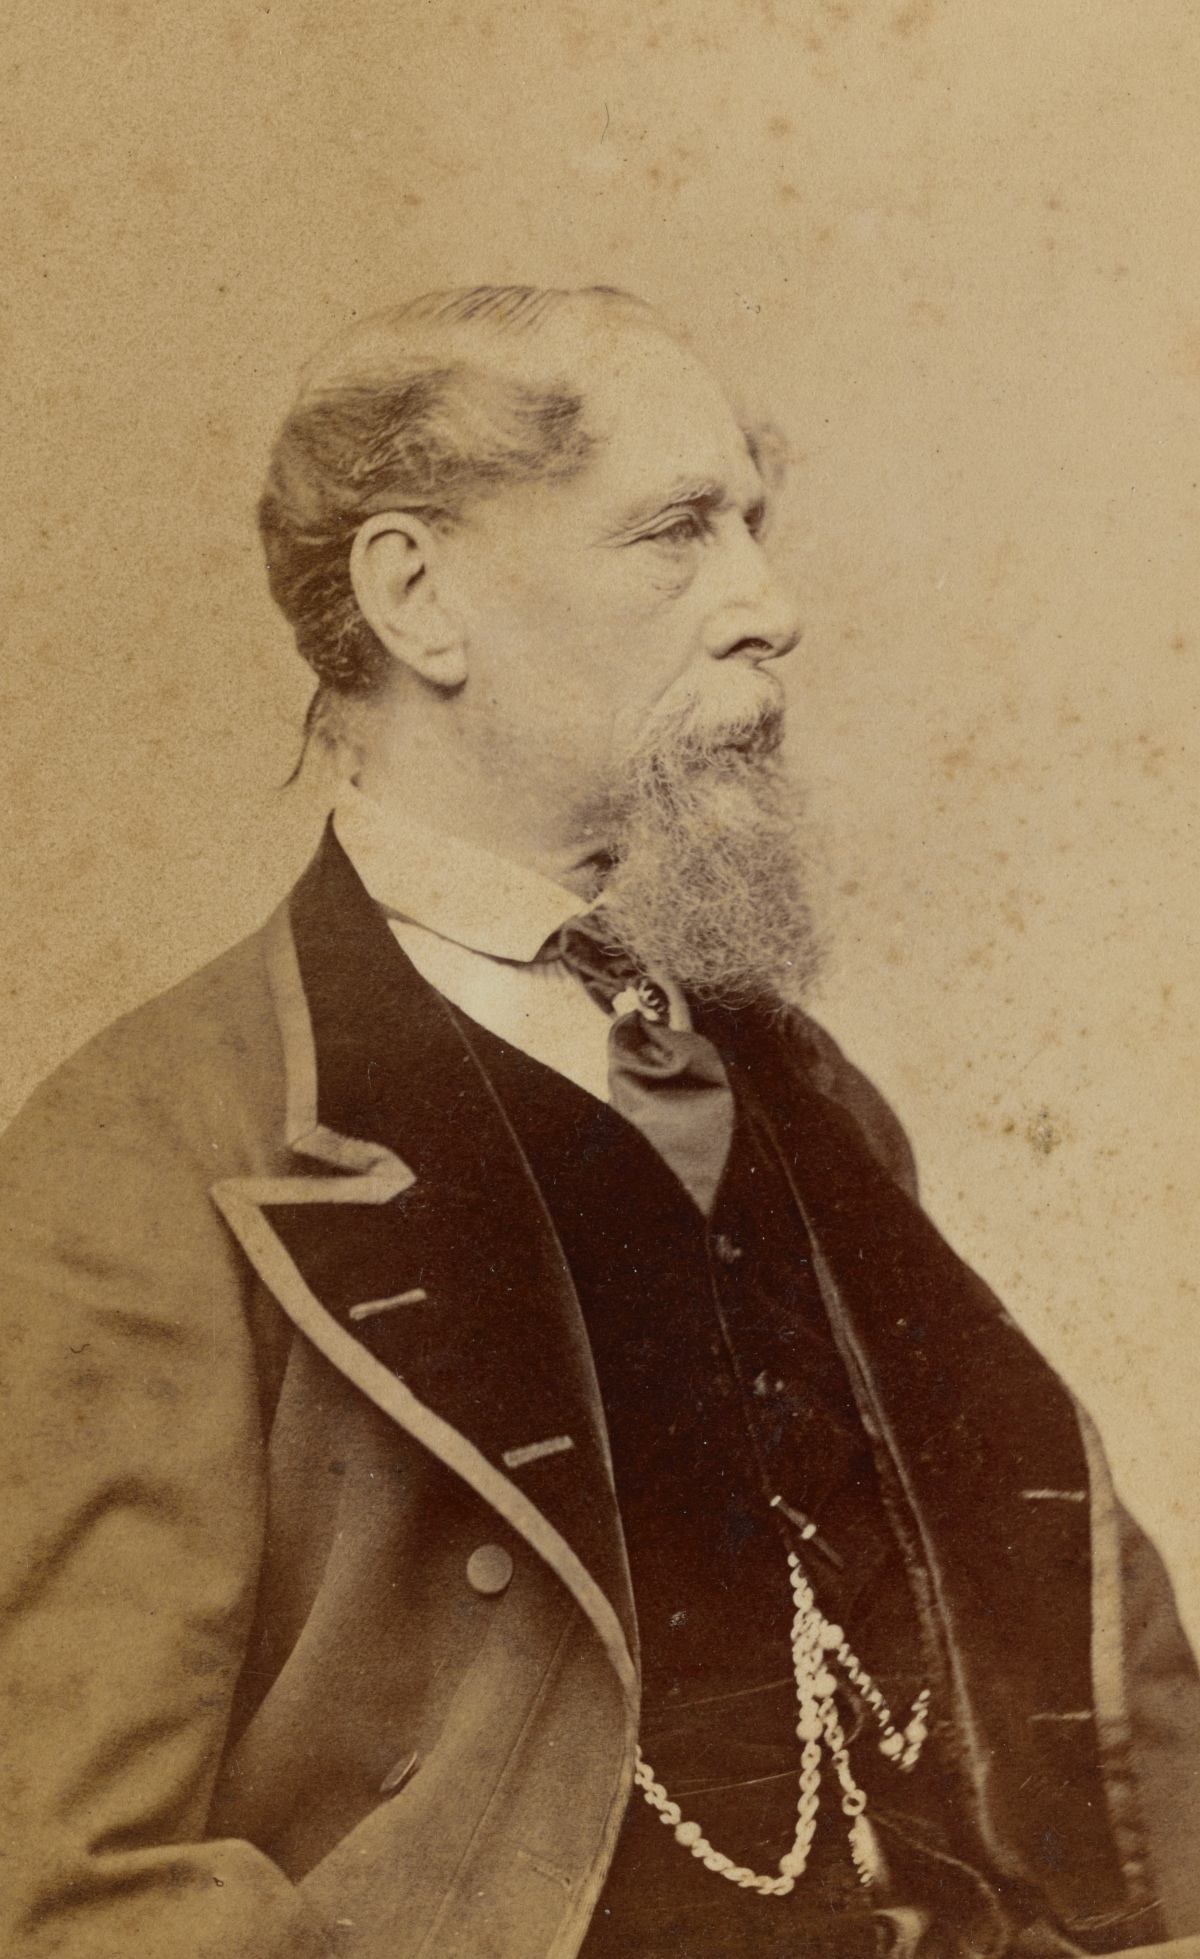 photo of Charles Dickens from 1867